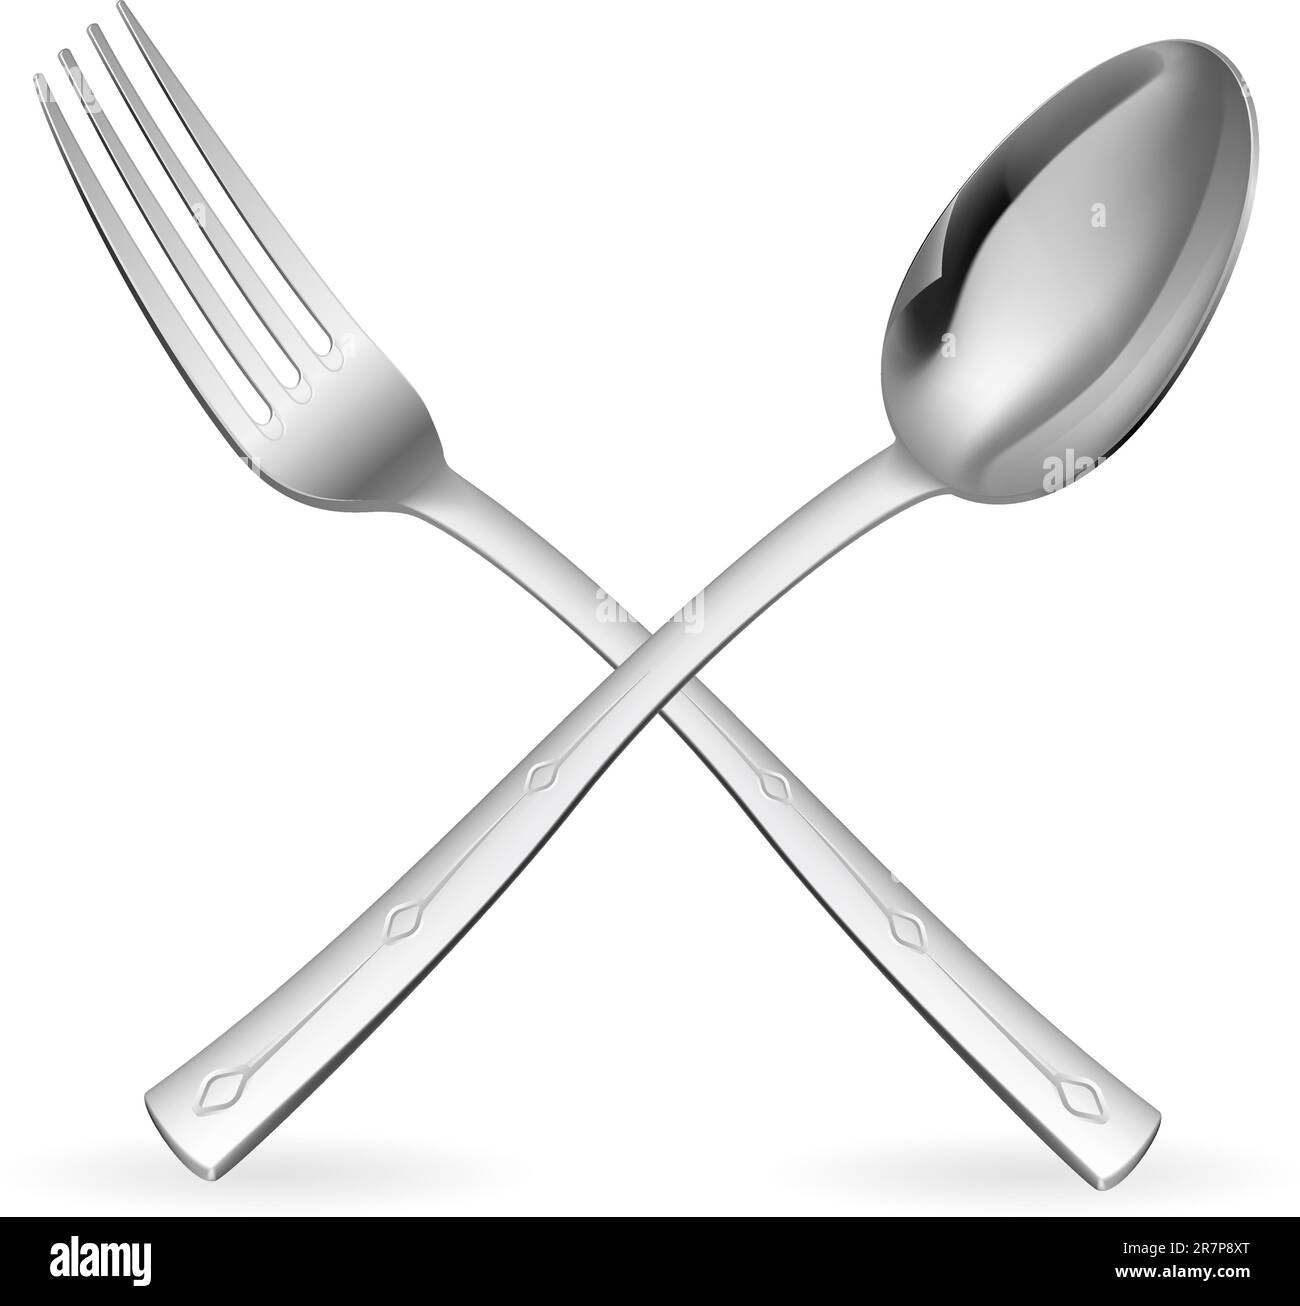 Crossed fork and spoon. Illustration on white background. Stock Vector